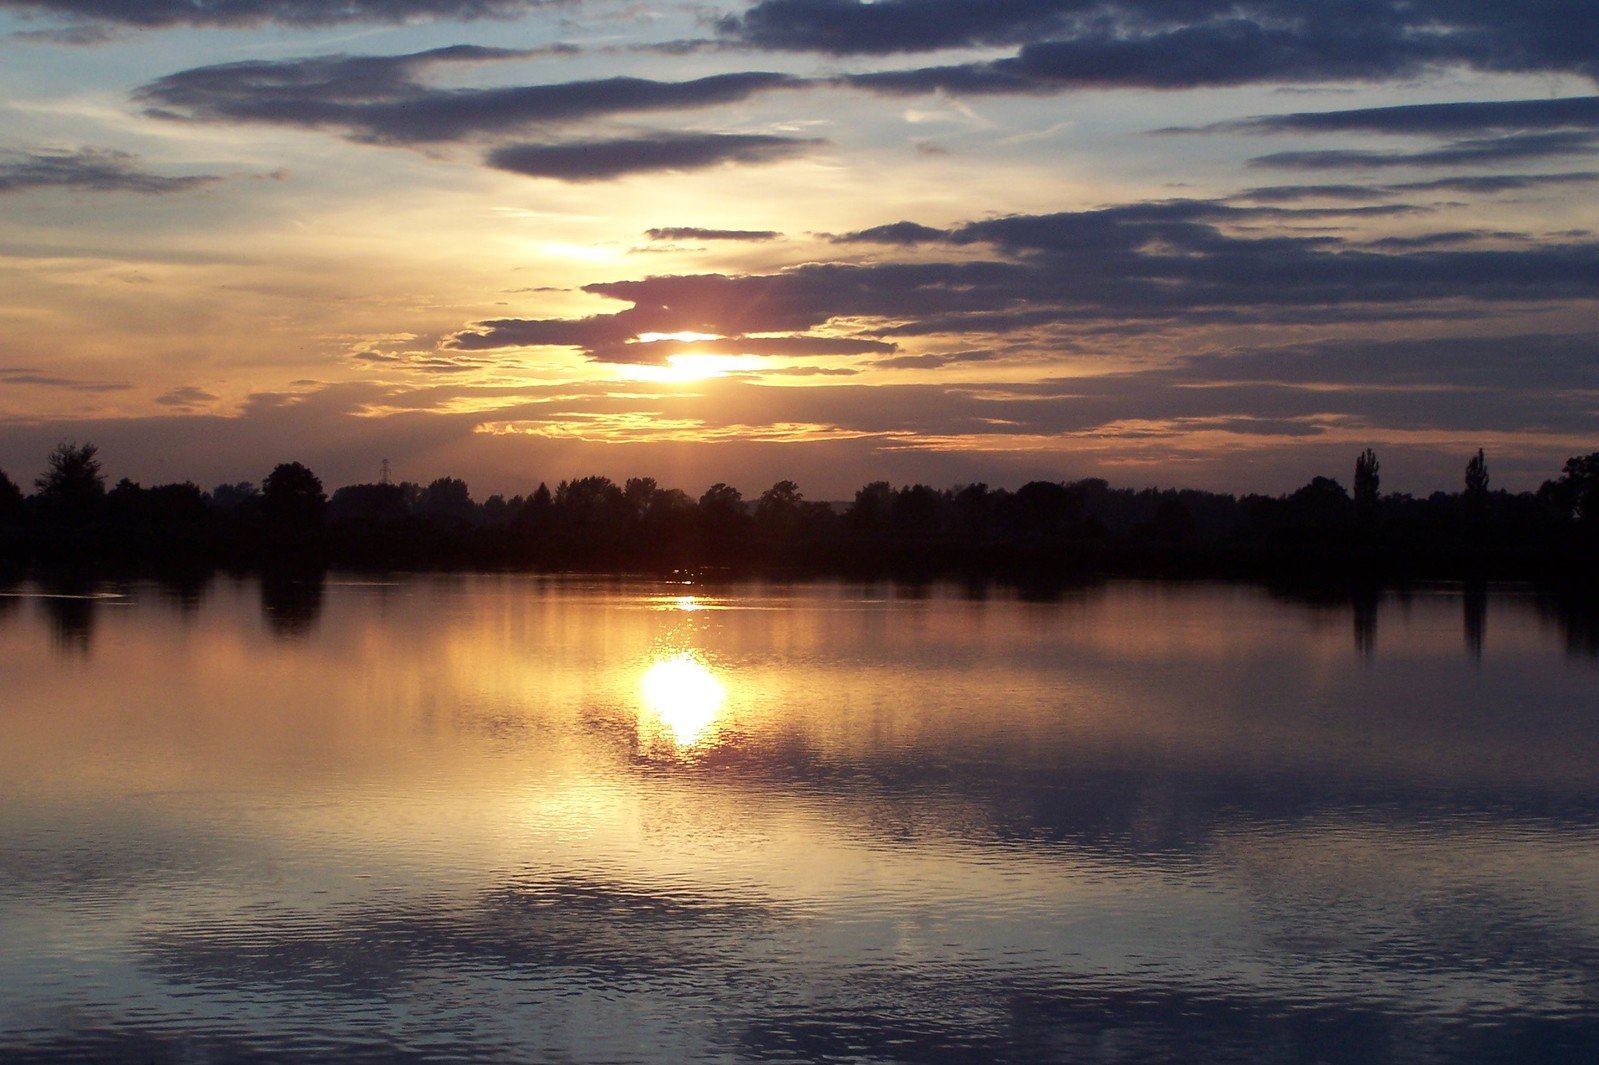 the sun rises over a lake with trees in the background